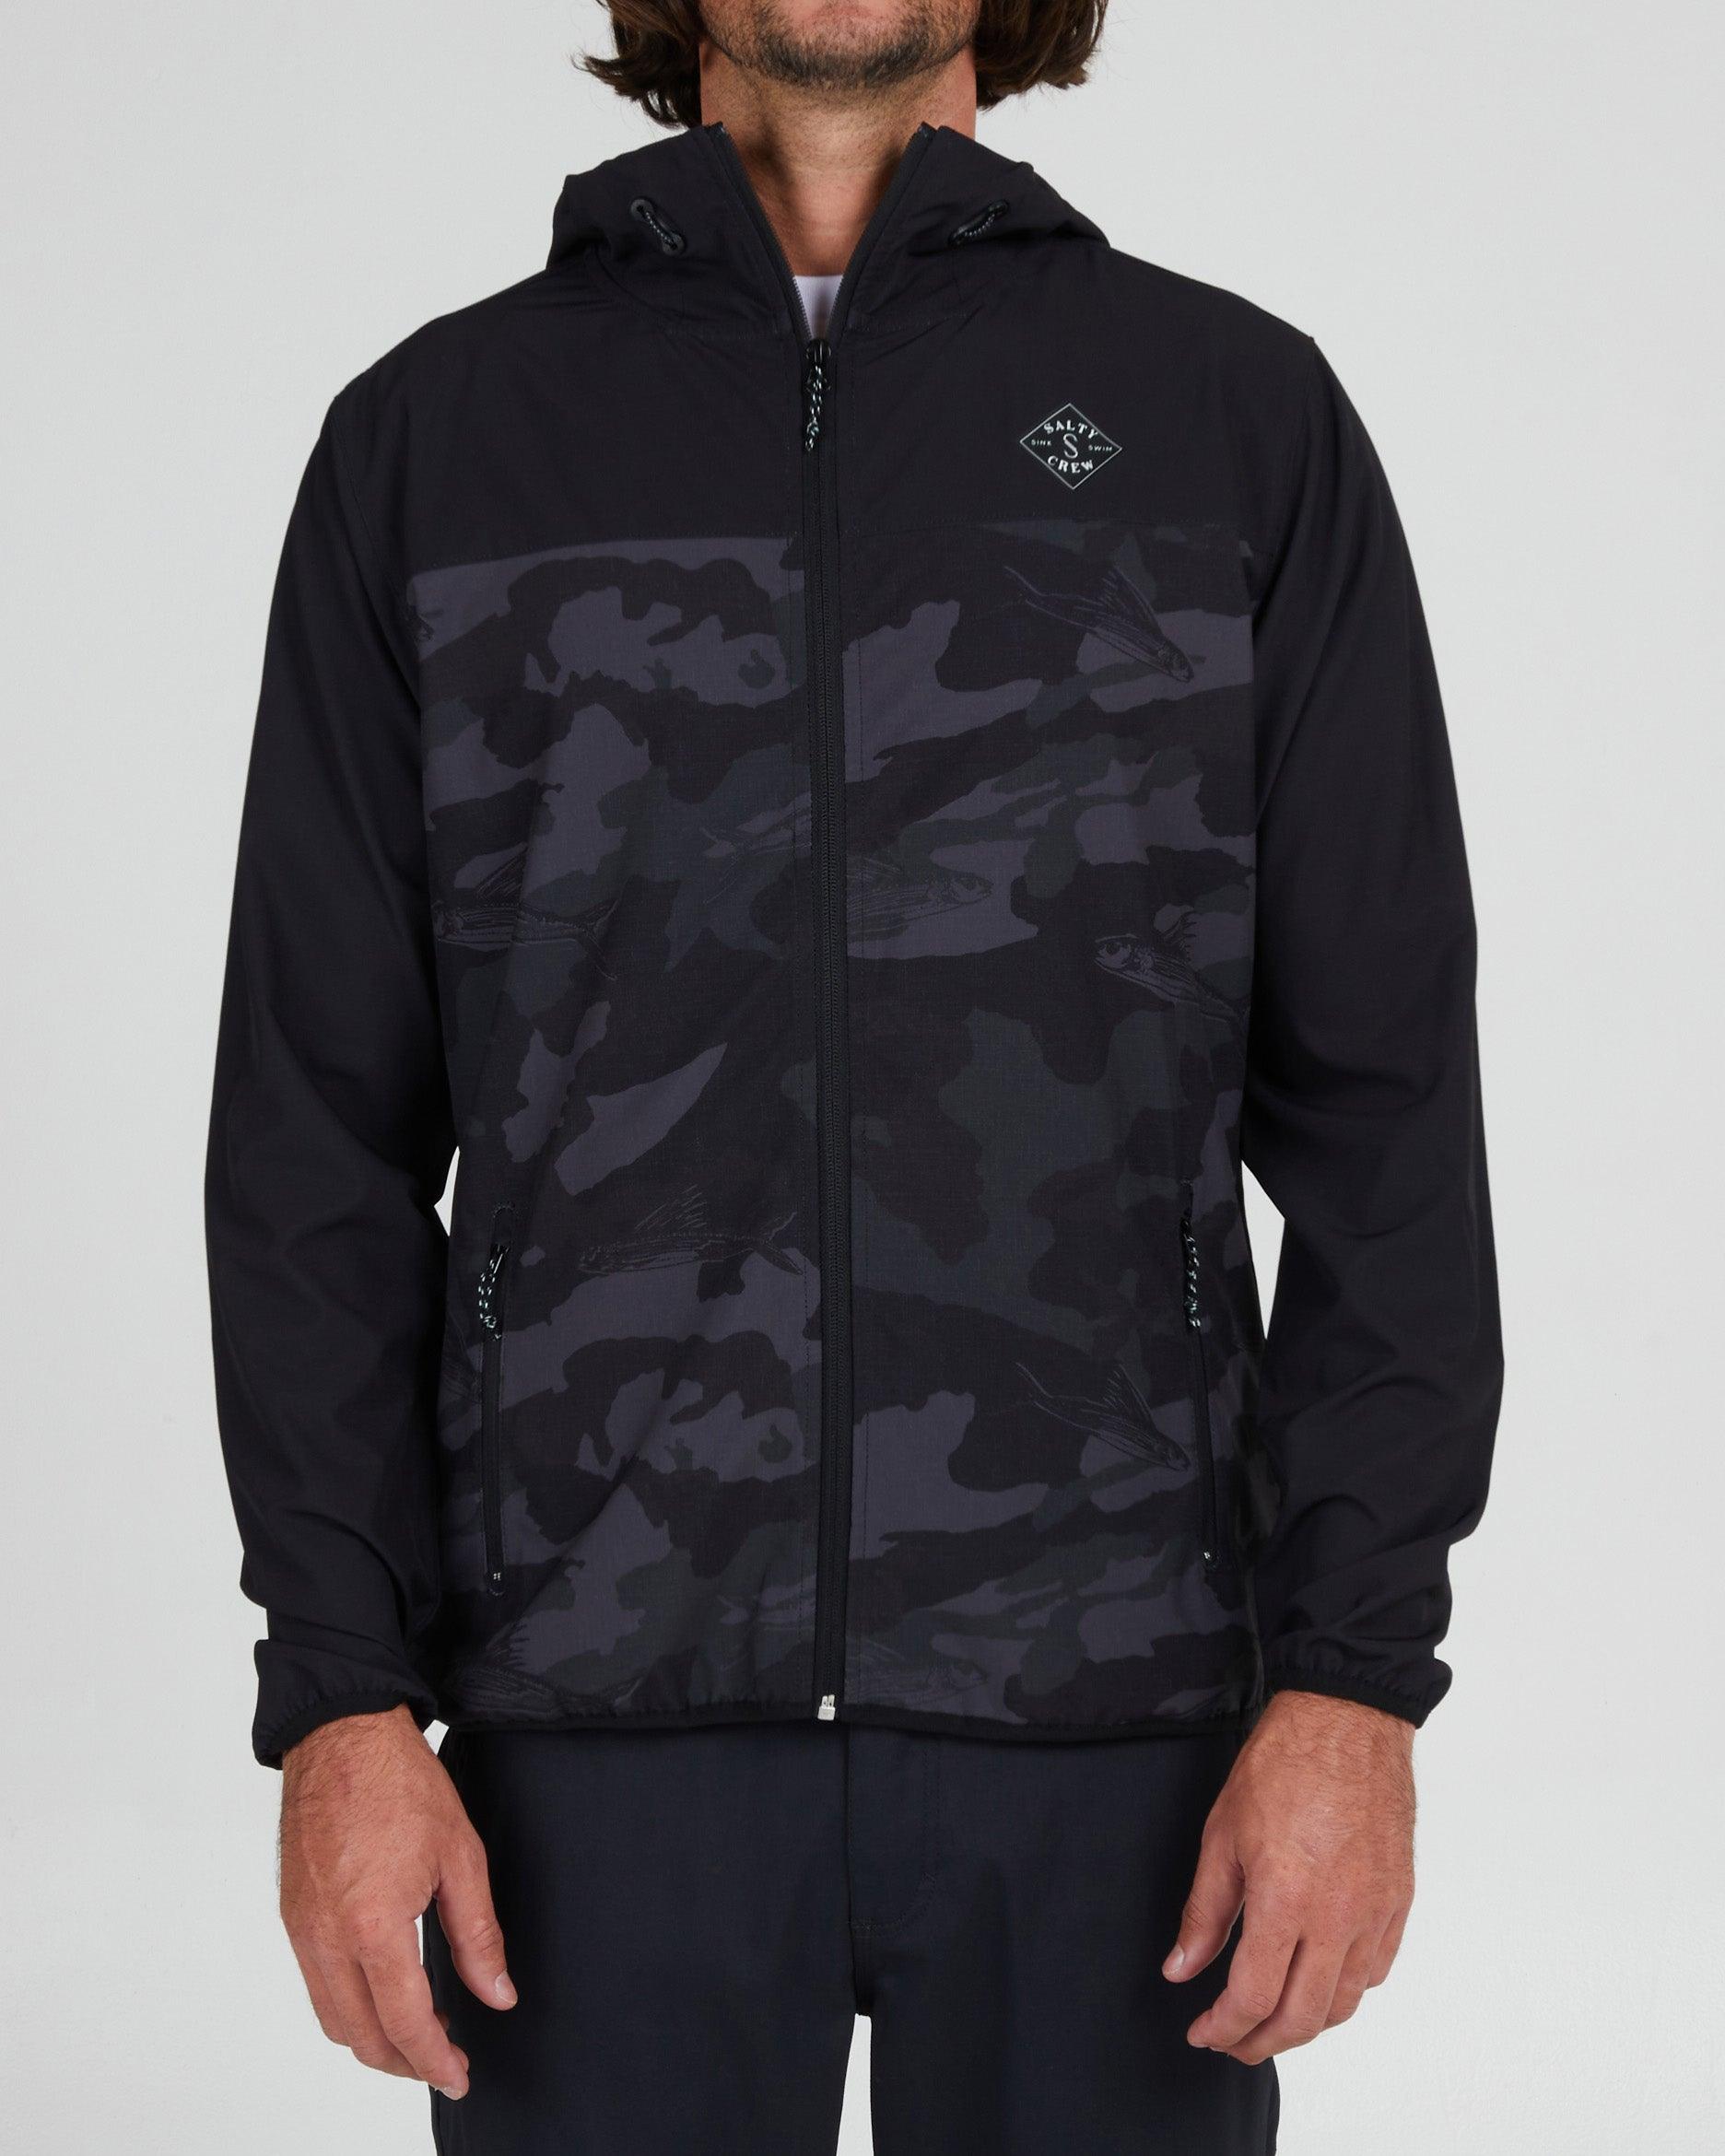 Stowaway Jacket - Black Camo - Purpose-Built / Home of the Trades